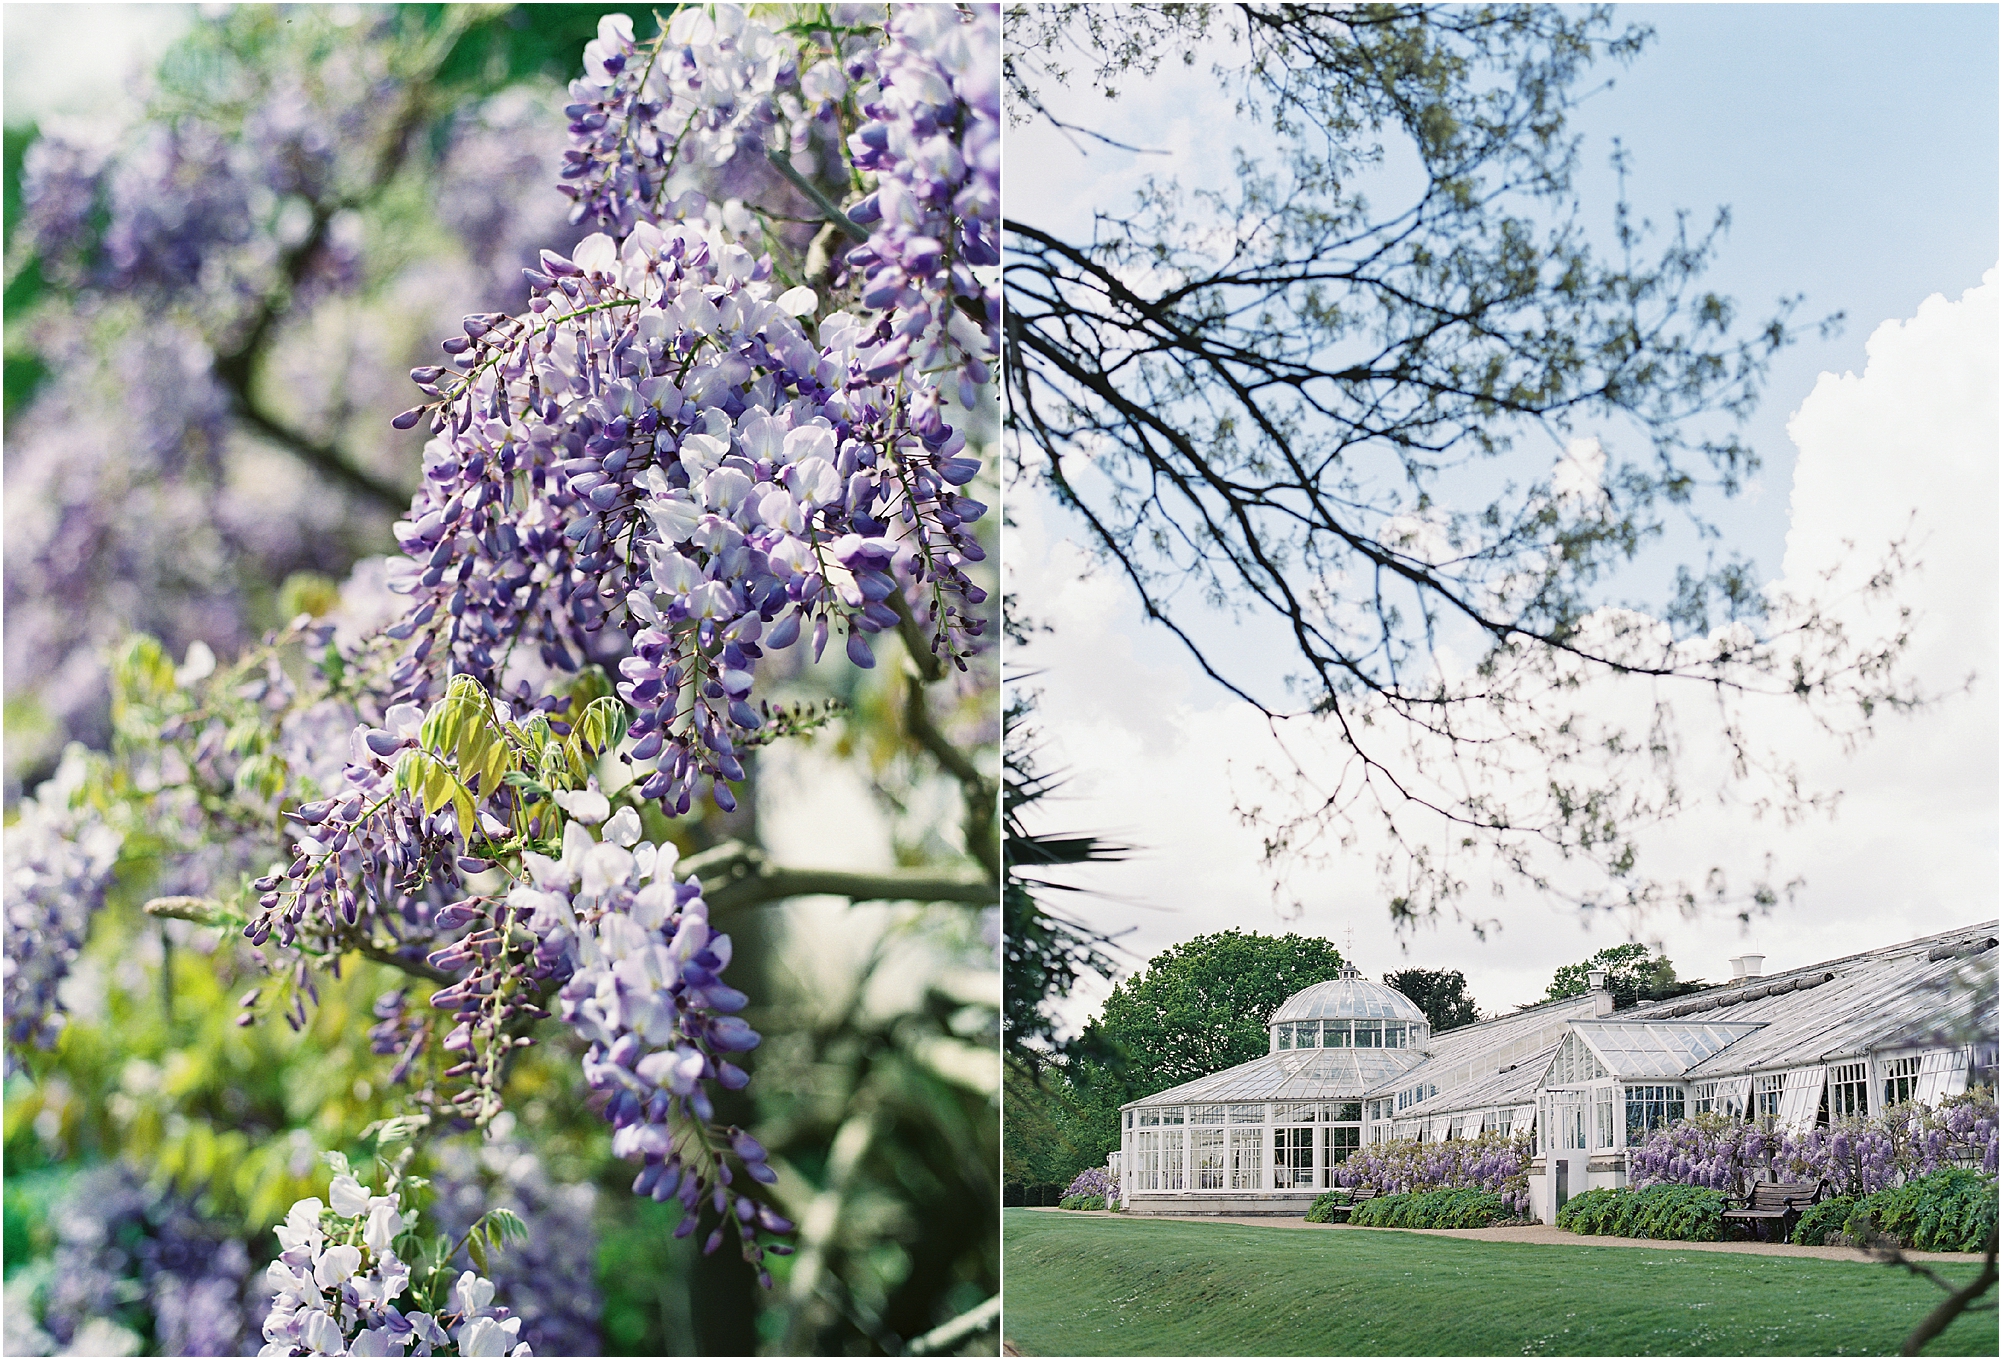 The orangery at a Chiswick House wedding with wisteria in bloom